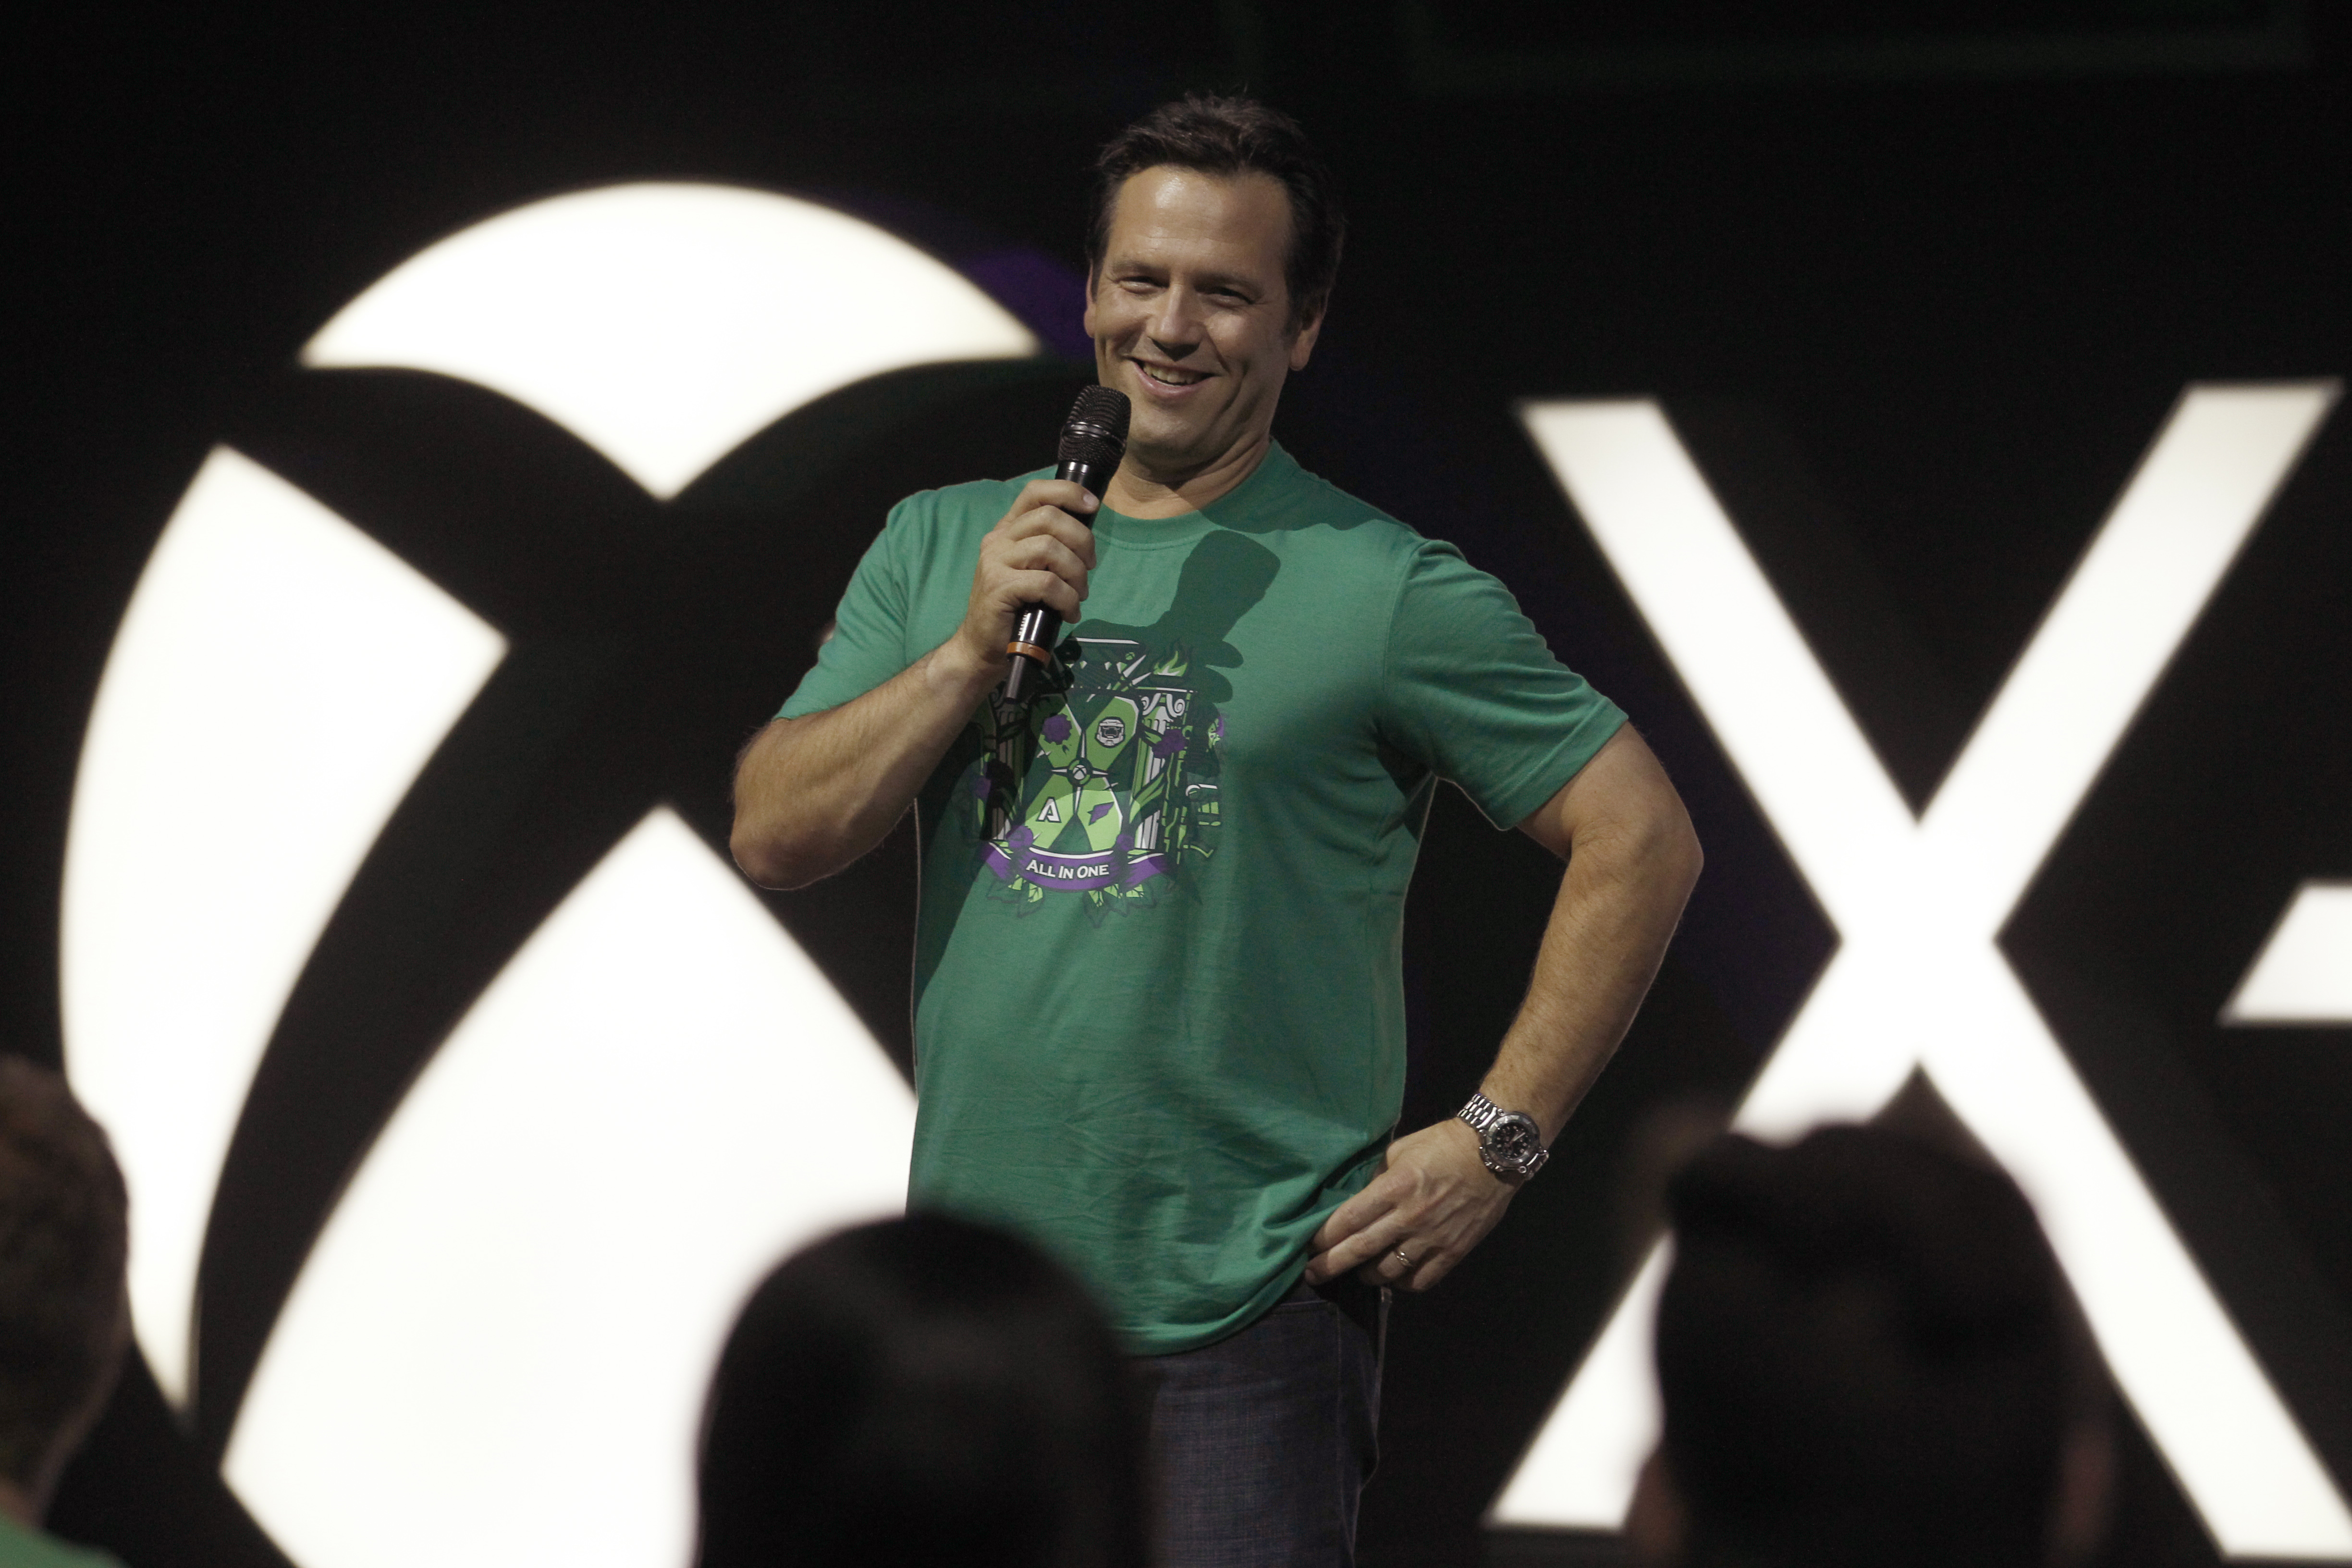 Phil Spencer on stage at Gamescom 2015